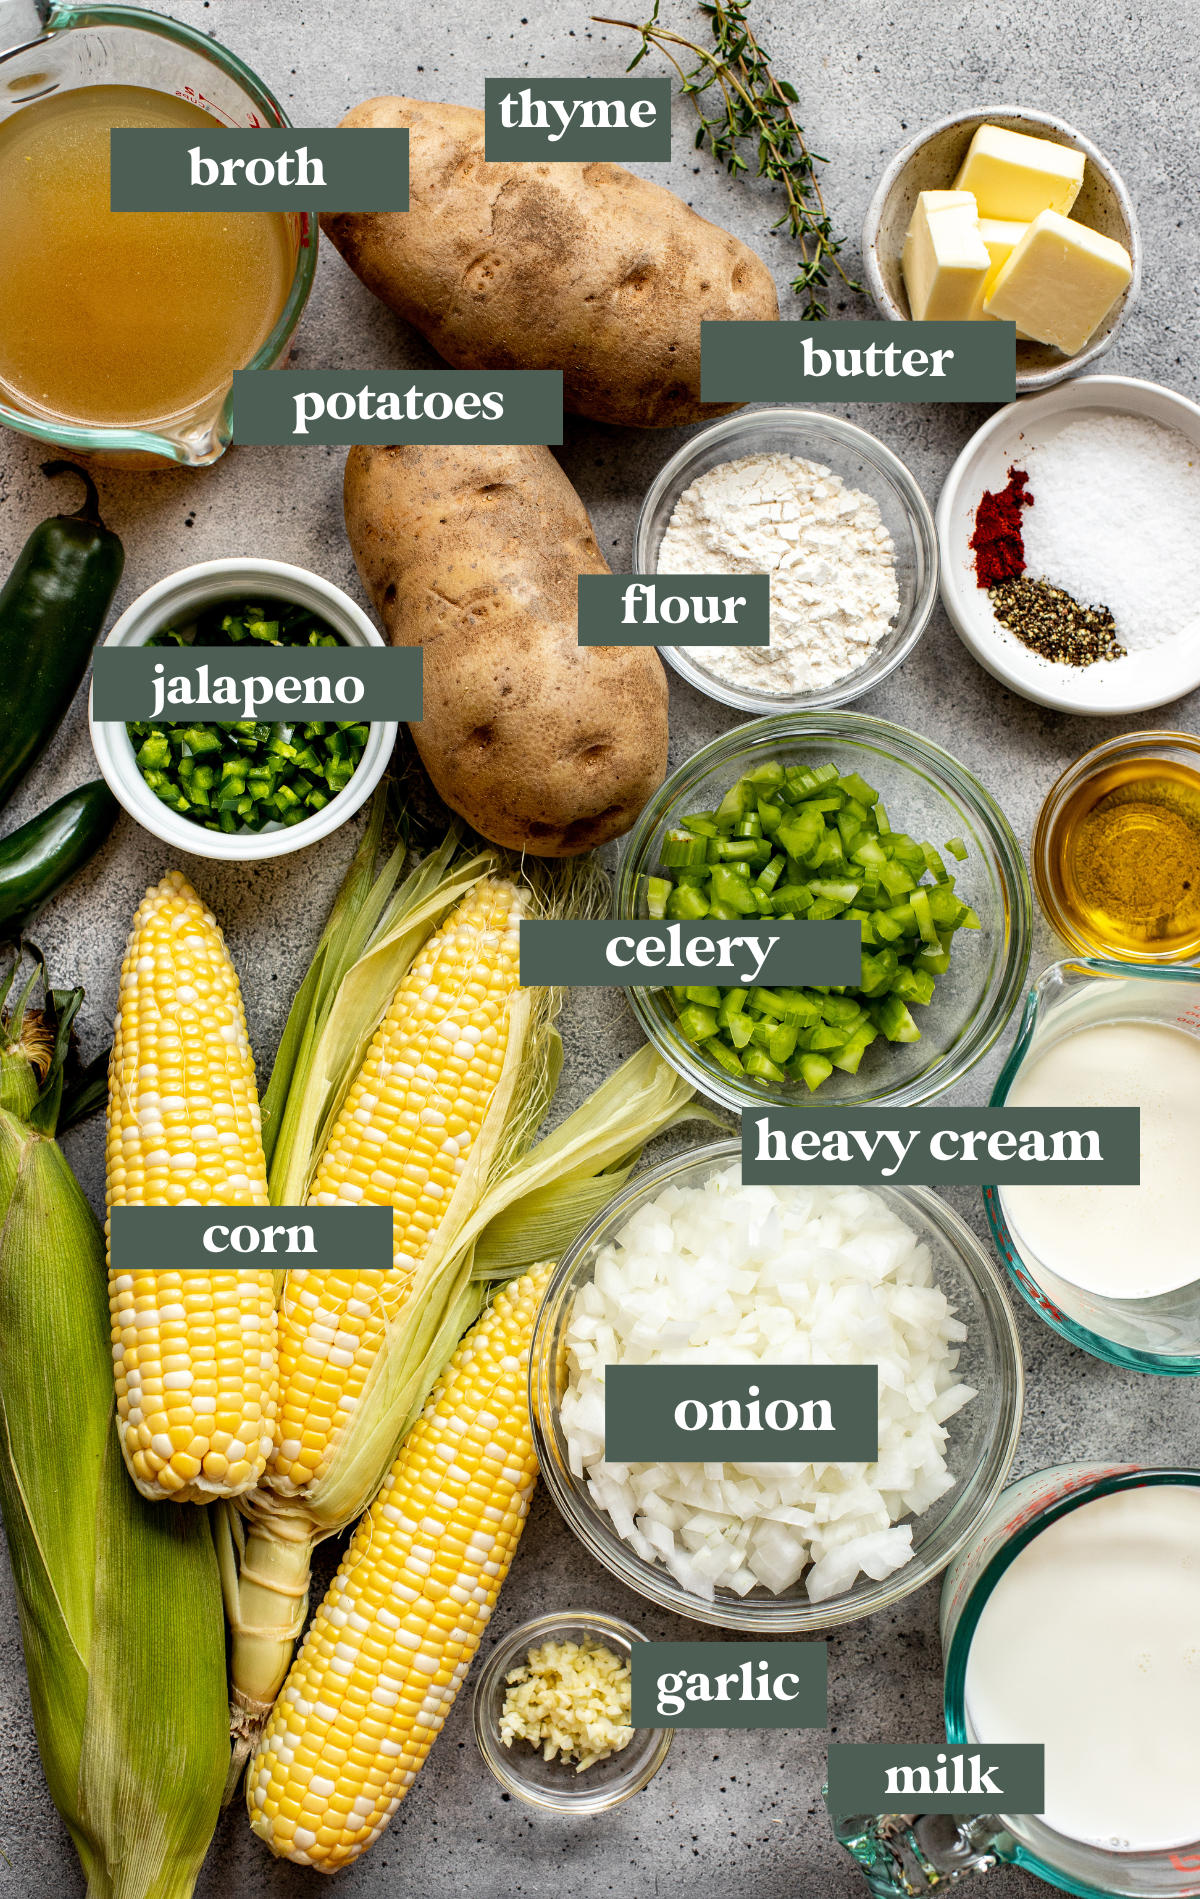 ingredients to make chowder in small glass dishes.